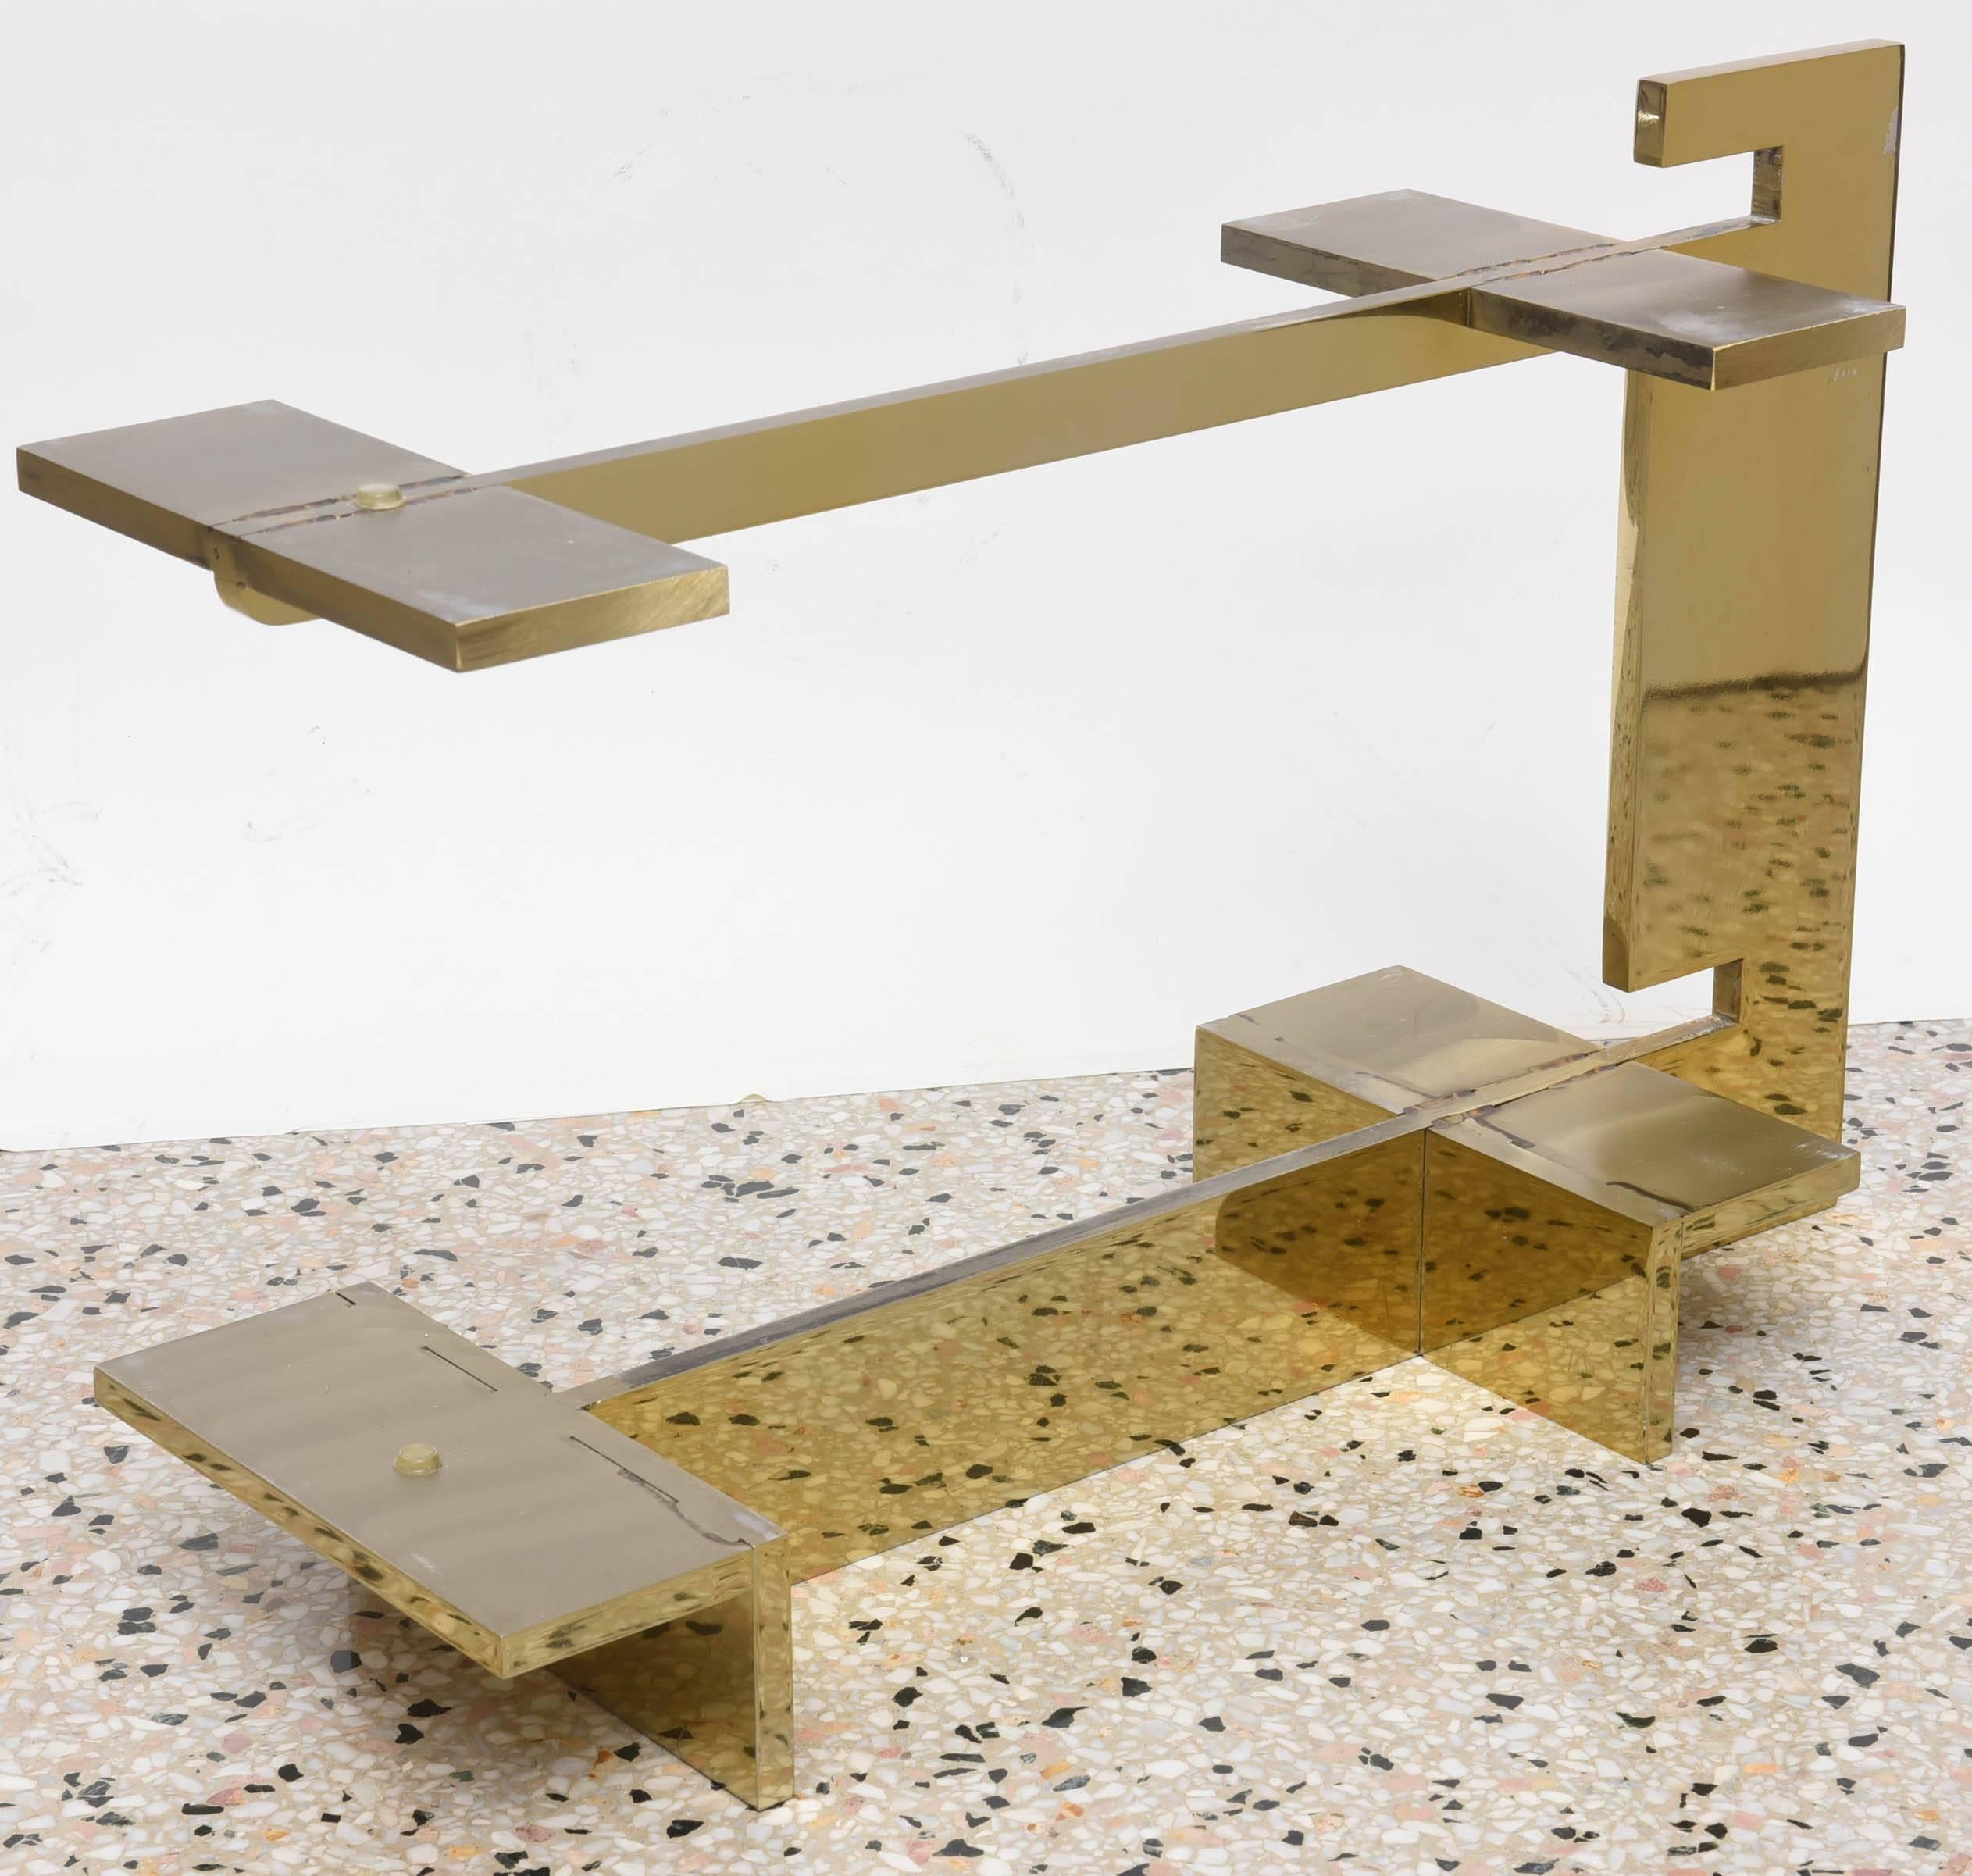 This handsome side table was designed by the iconic furniture designer Milo Baughman and was produced by DIA (Design Institute of America) in the 1970s.

The piece is brass-plated steel with two shelves of polished travertine marble in a